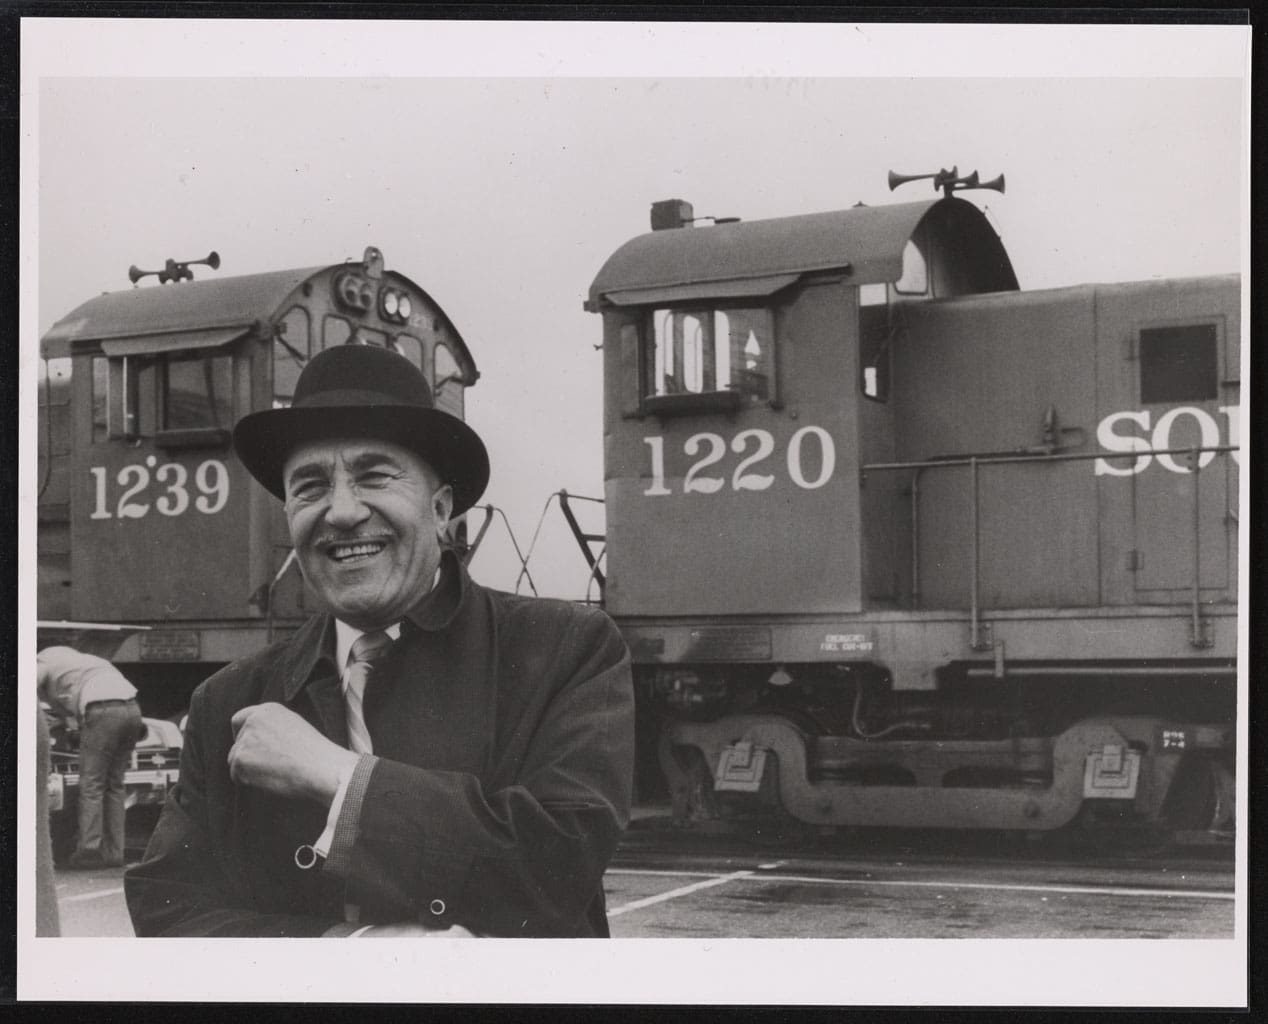 C.L. Dellums smiling standing in front of locomotive